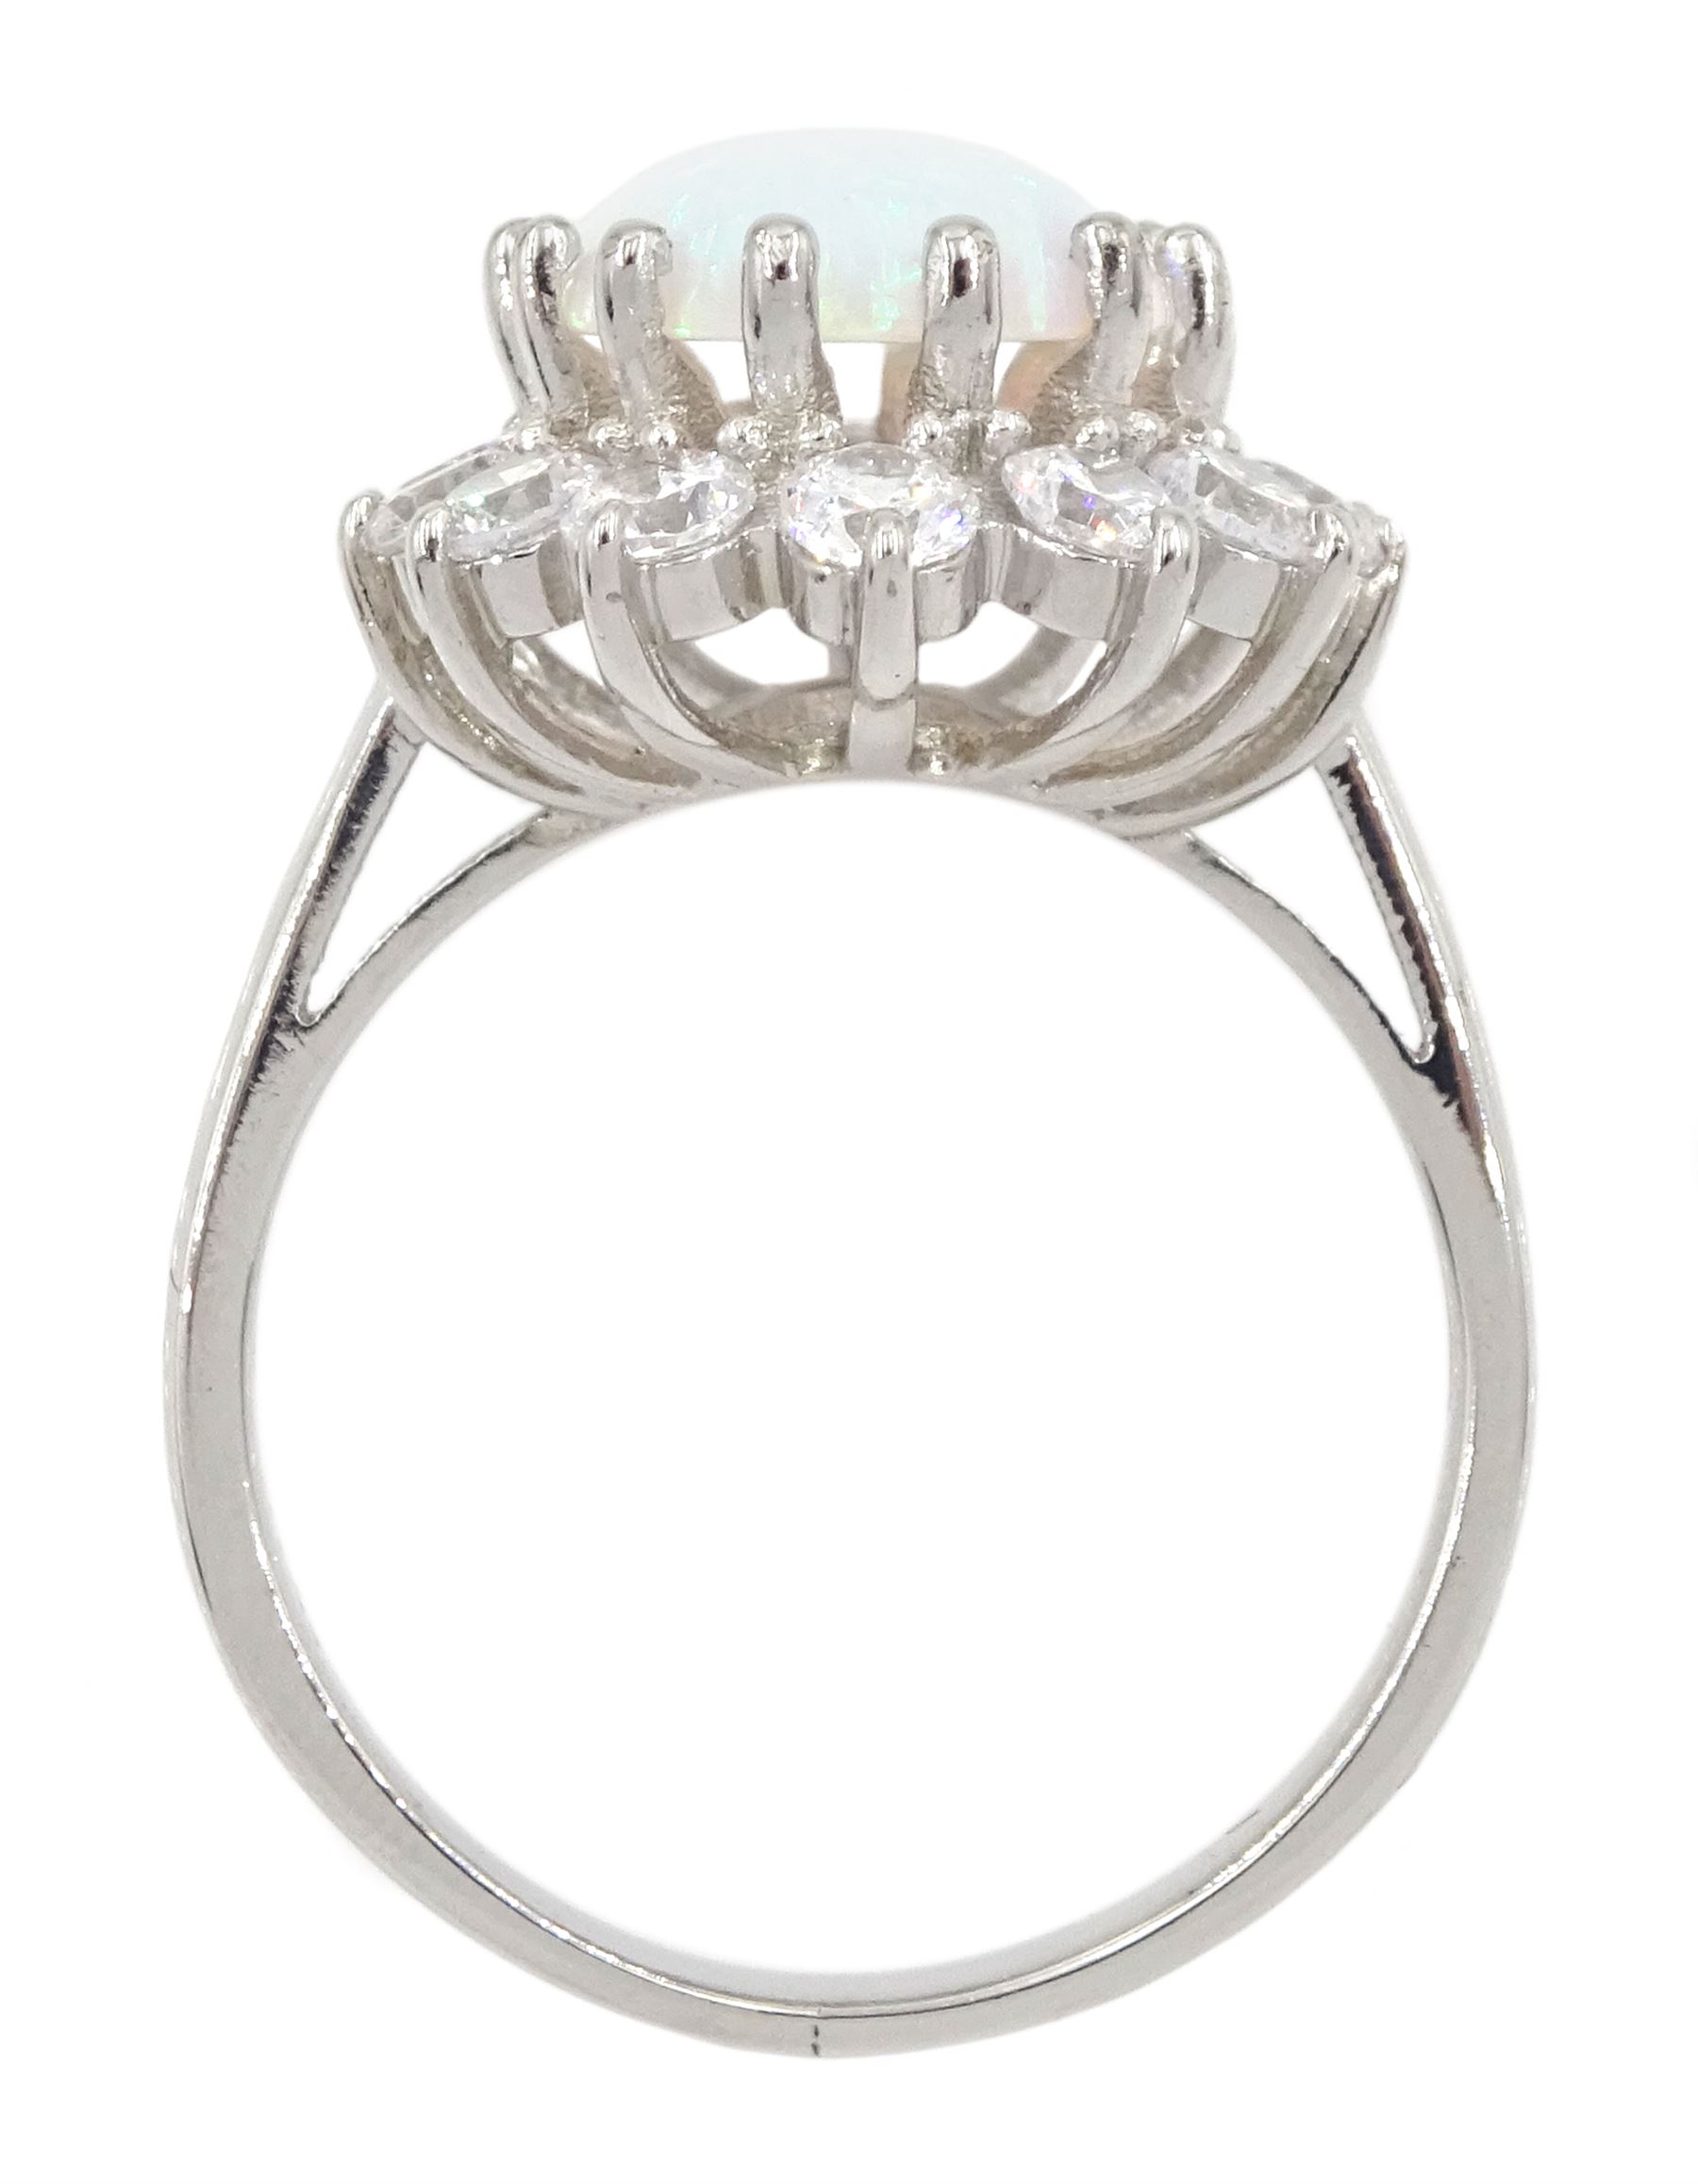 Silver opal and cubic zirconia cluster ring - Image 4 of 5